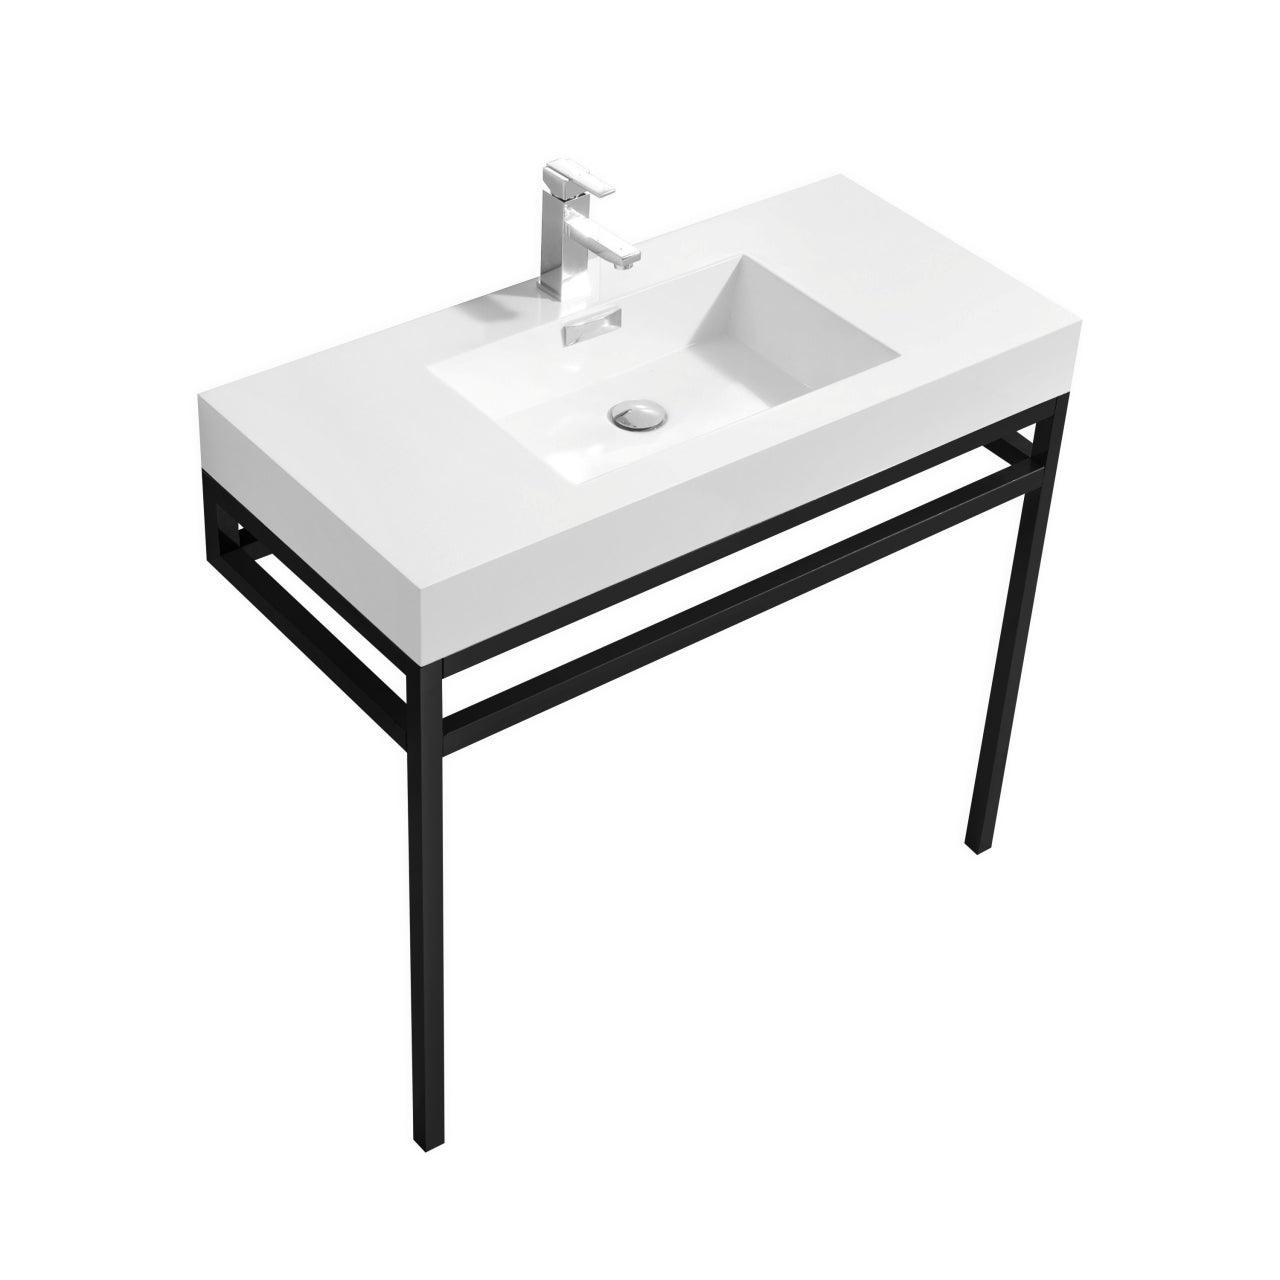 Haus 40" Stainless Steel Console w/ White Acrylic Sink - Home and Bath Depot